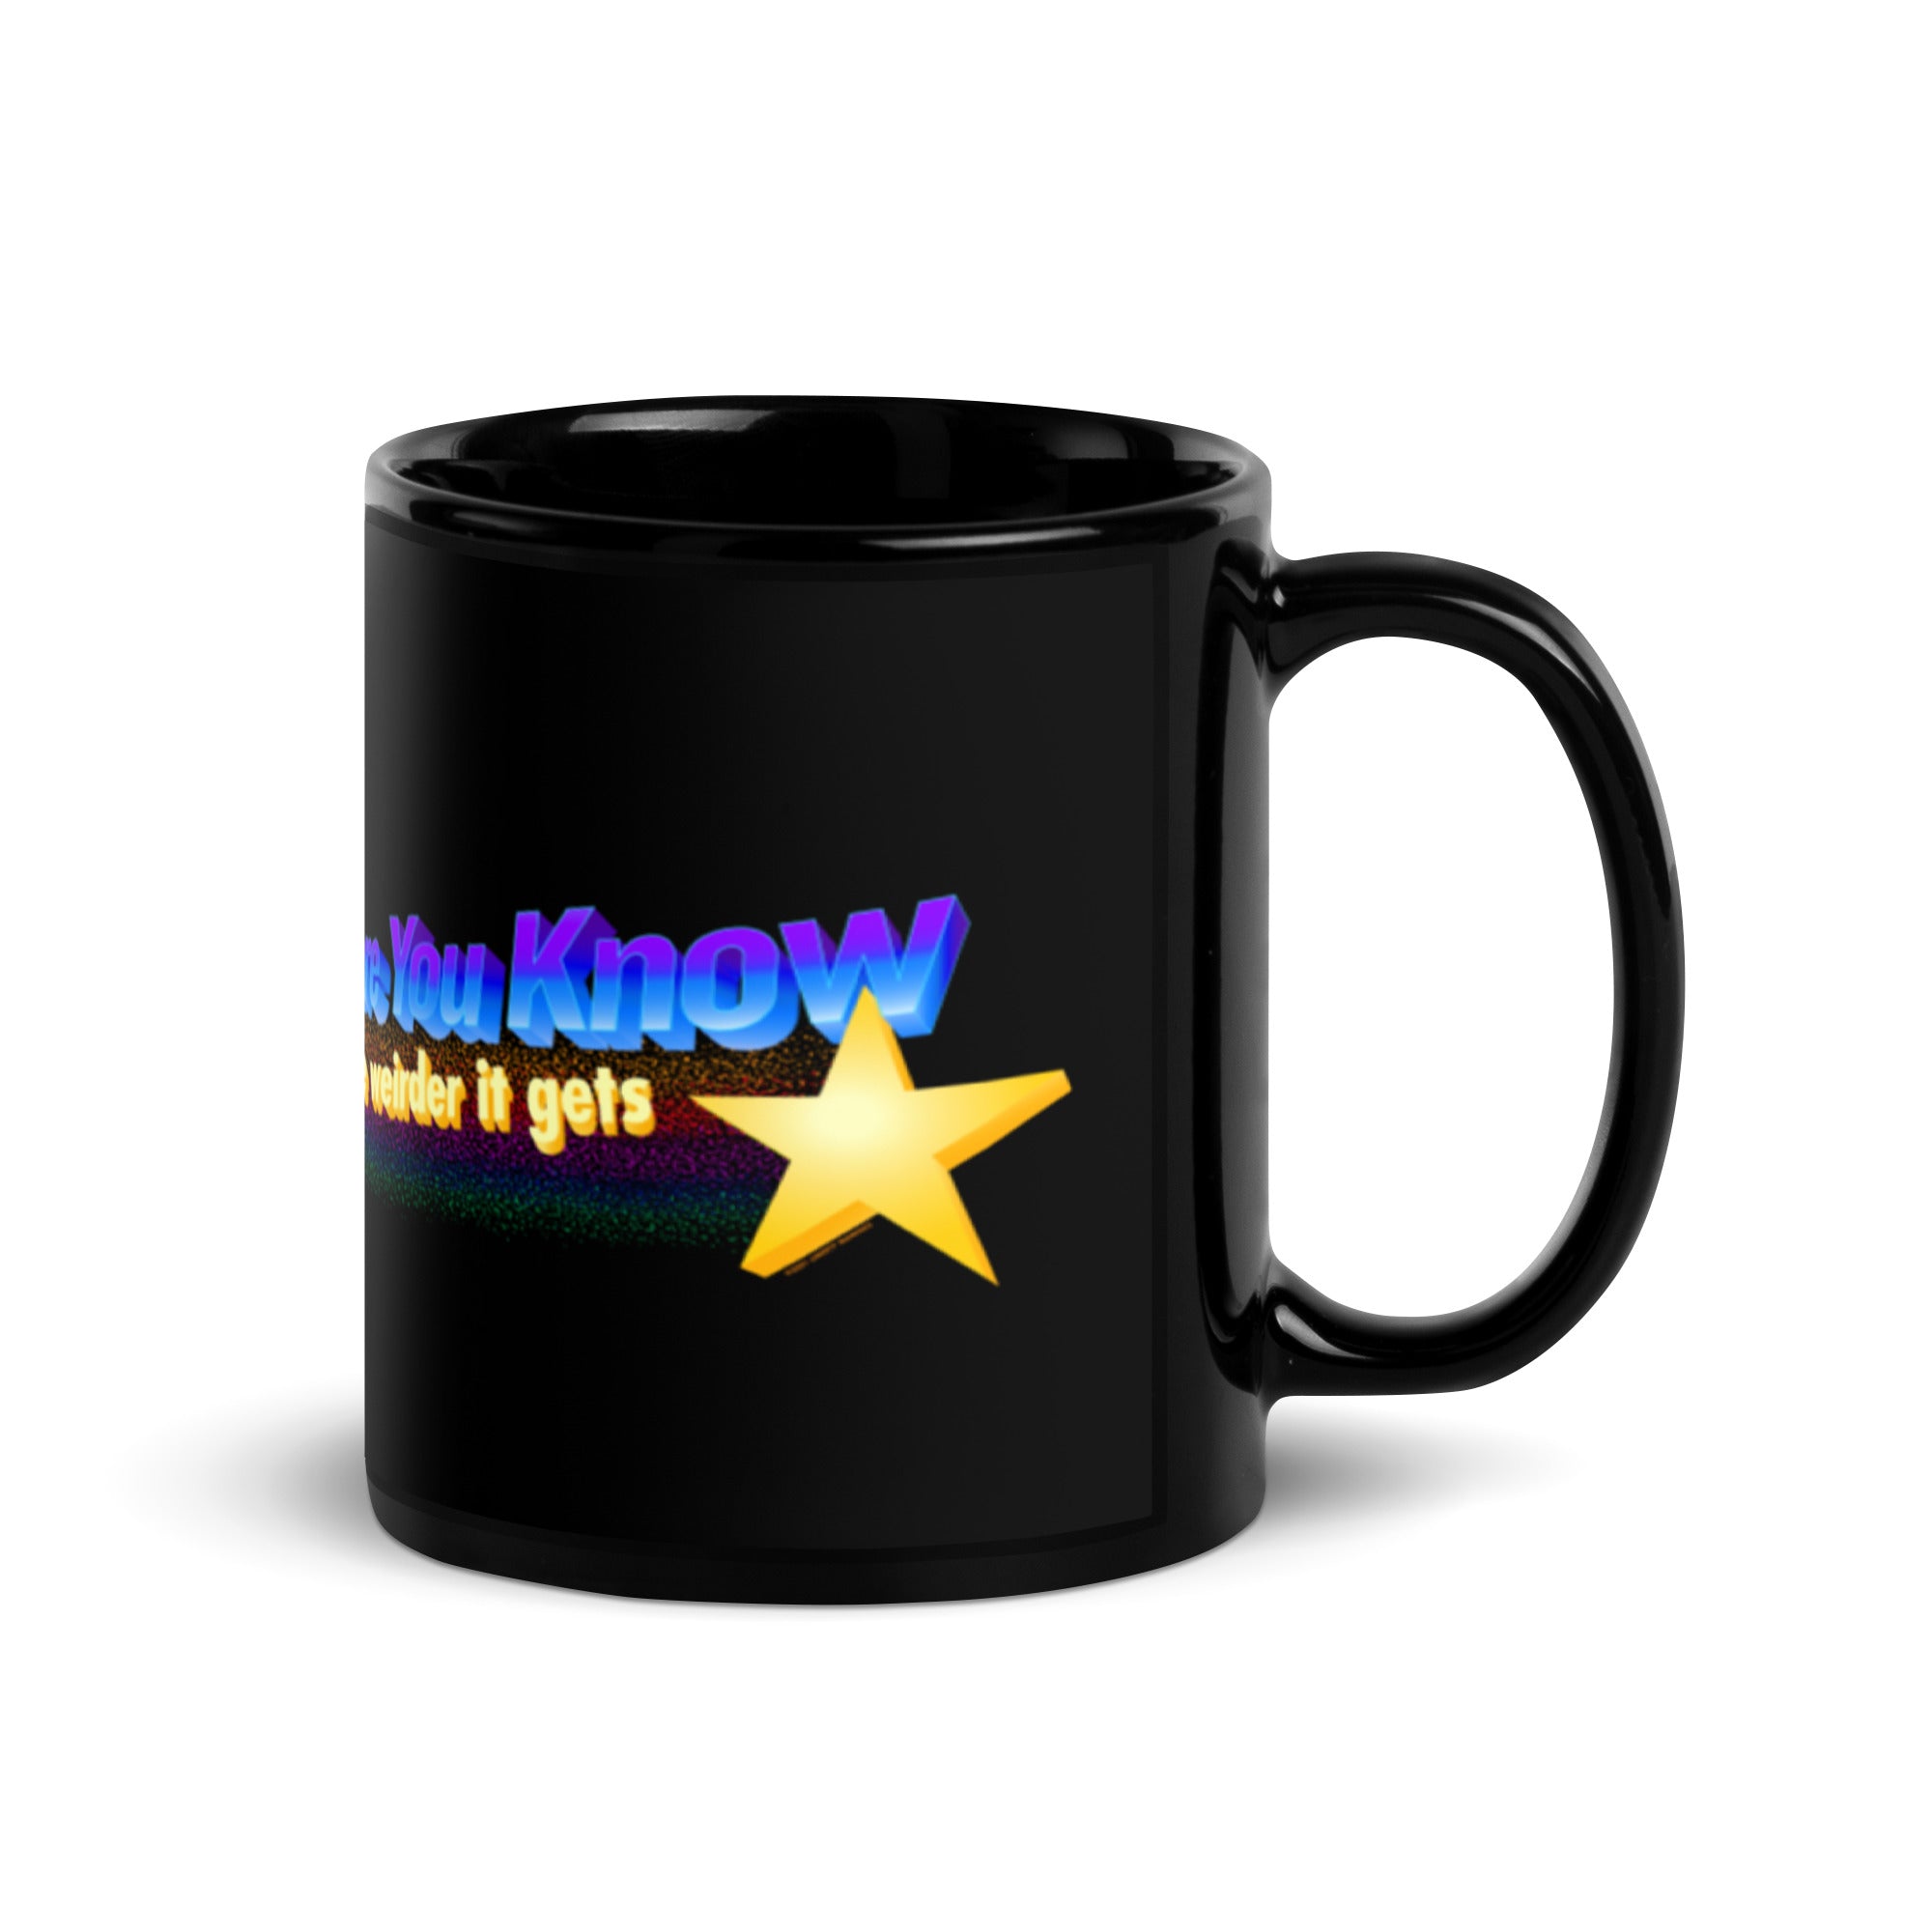 Then More You Know The Weirder It Gets  Mug